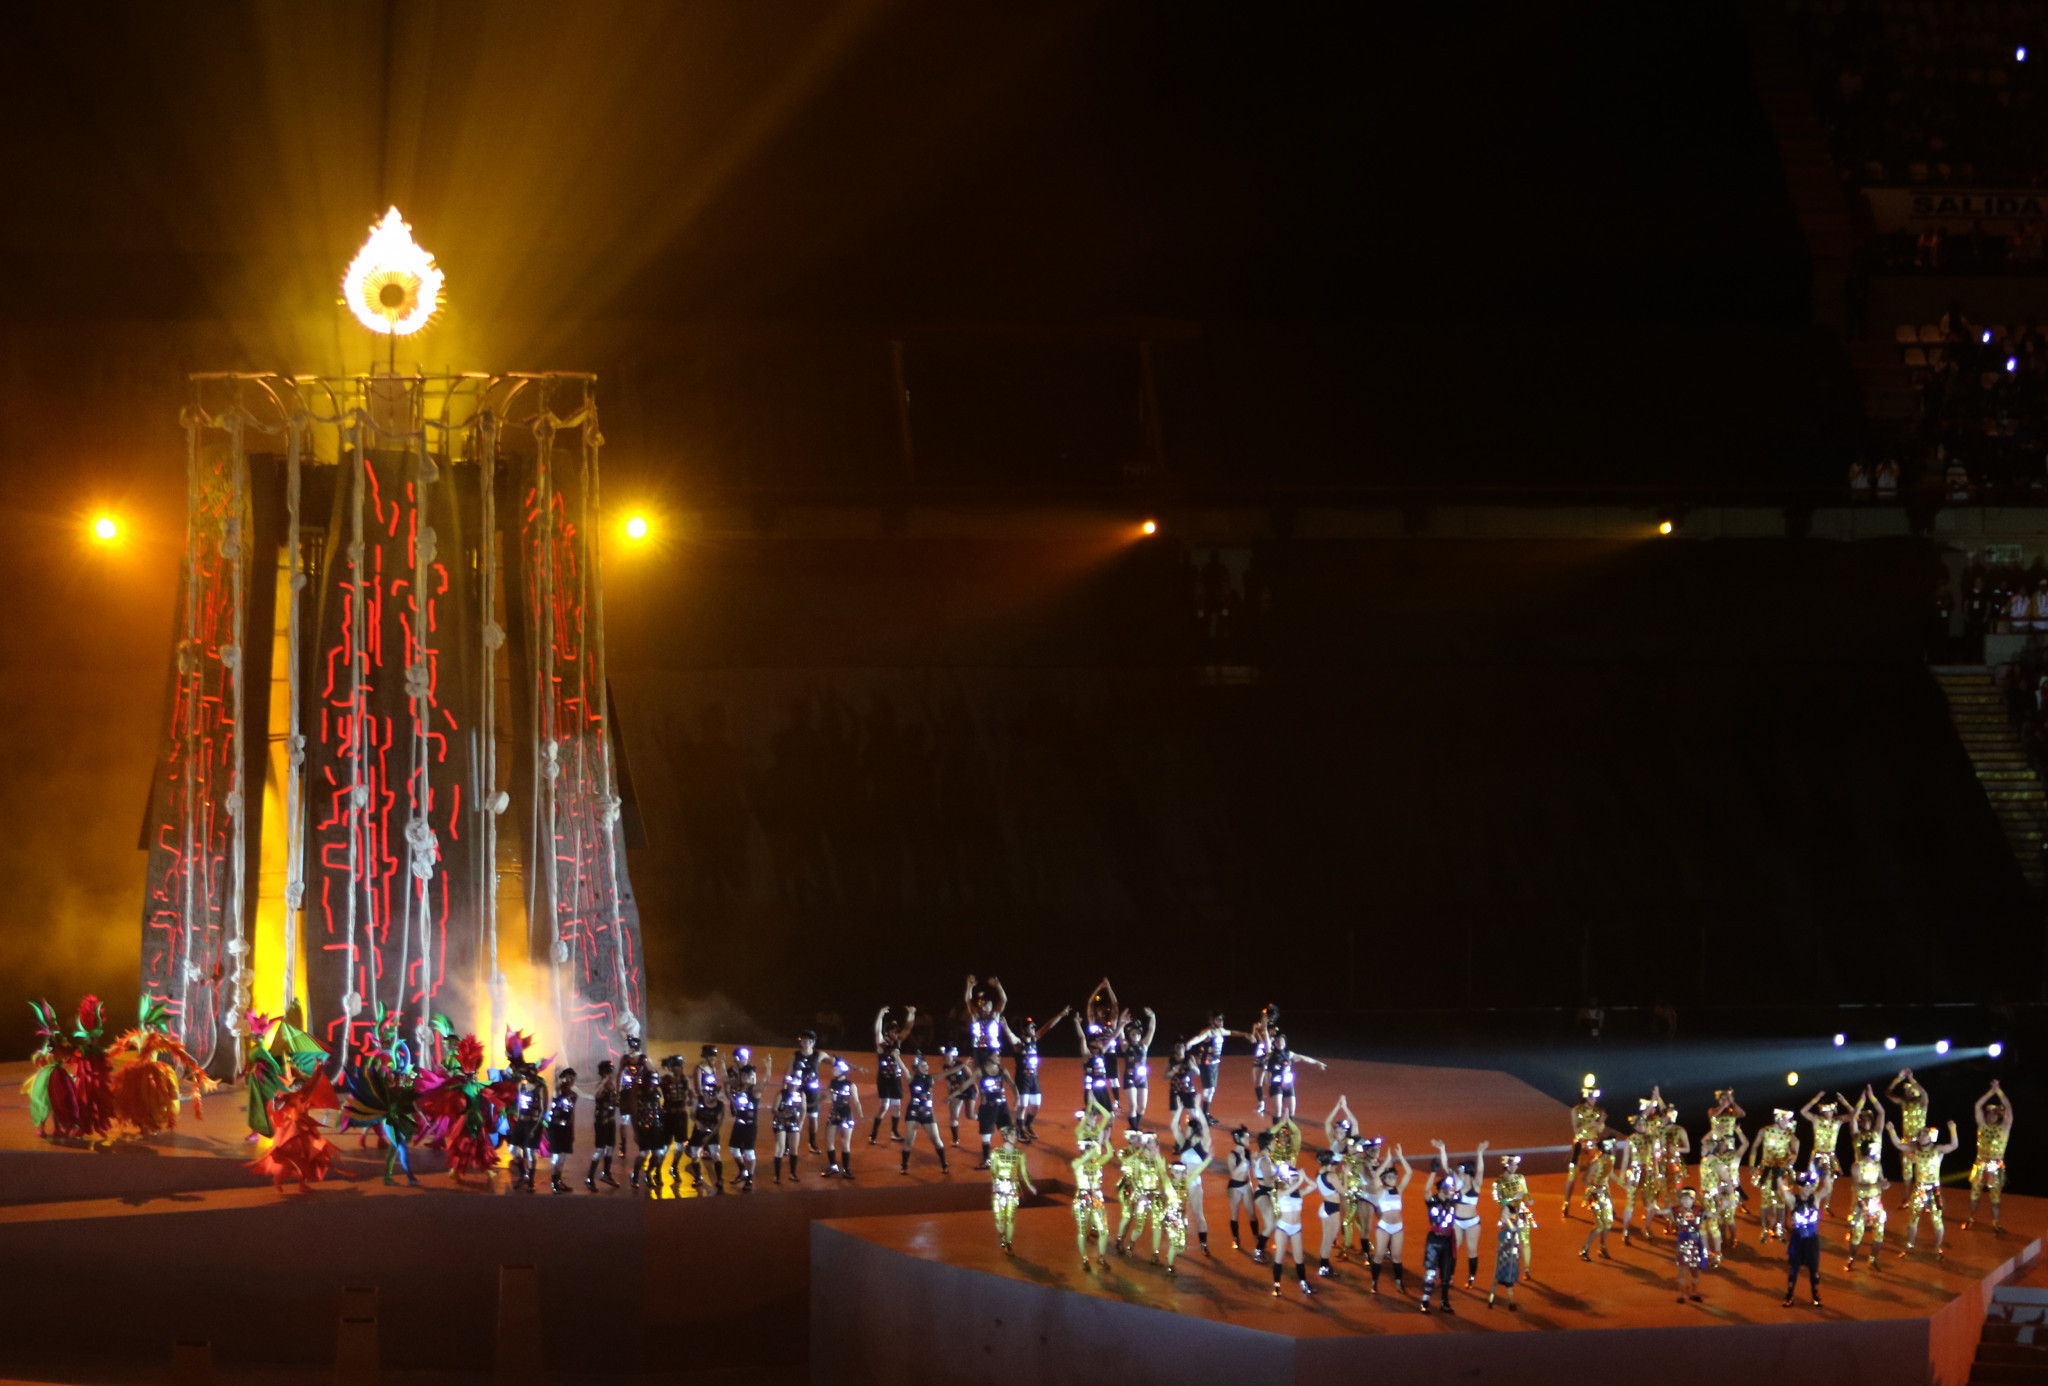 History and modern performance combined at the Parapan American Games Opening Ceremony ©Getty Images